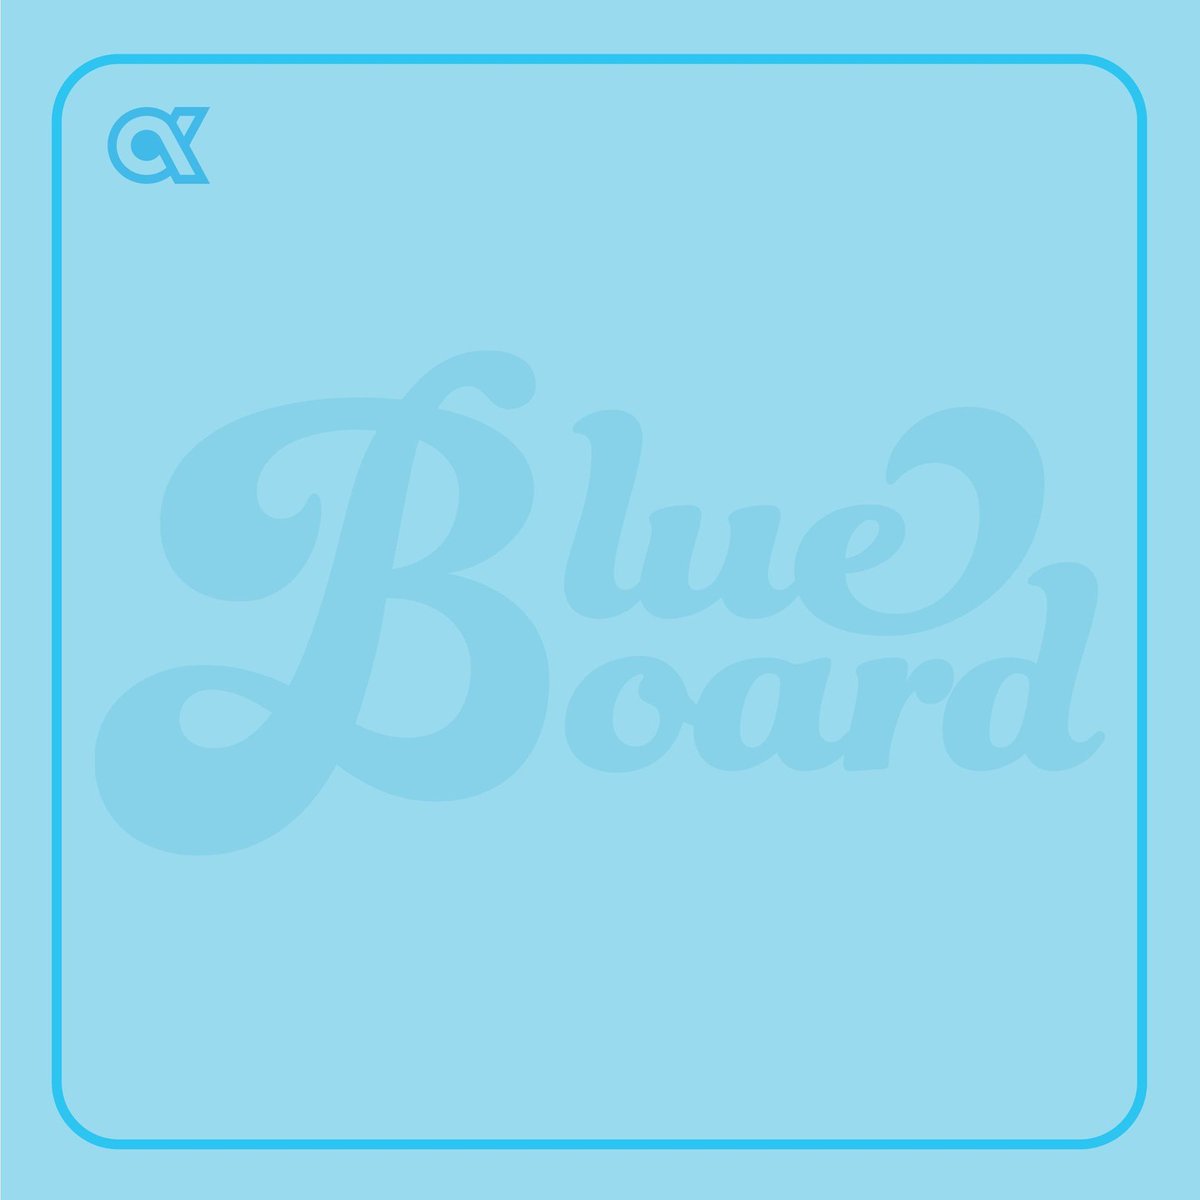 Our thoughts go out to our friends at Blueboard as they recently ceased operations. Blueboard was doing great things in the rewards & recognition space and impacting many organizations and people for the better.